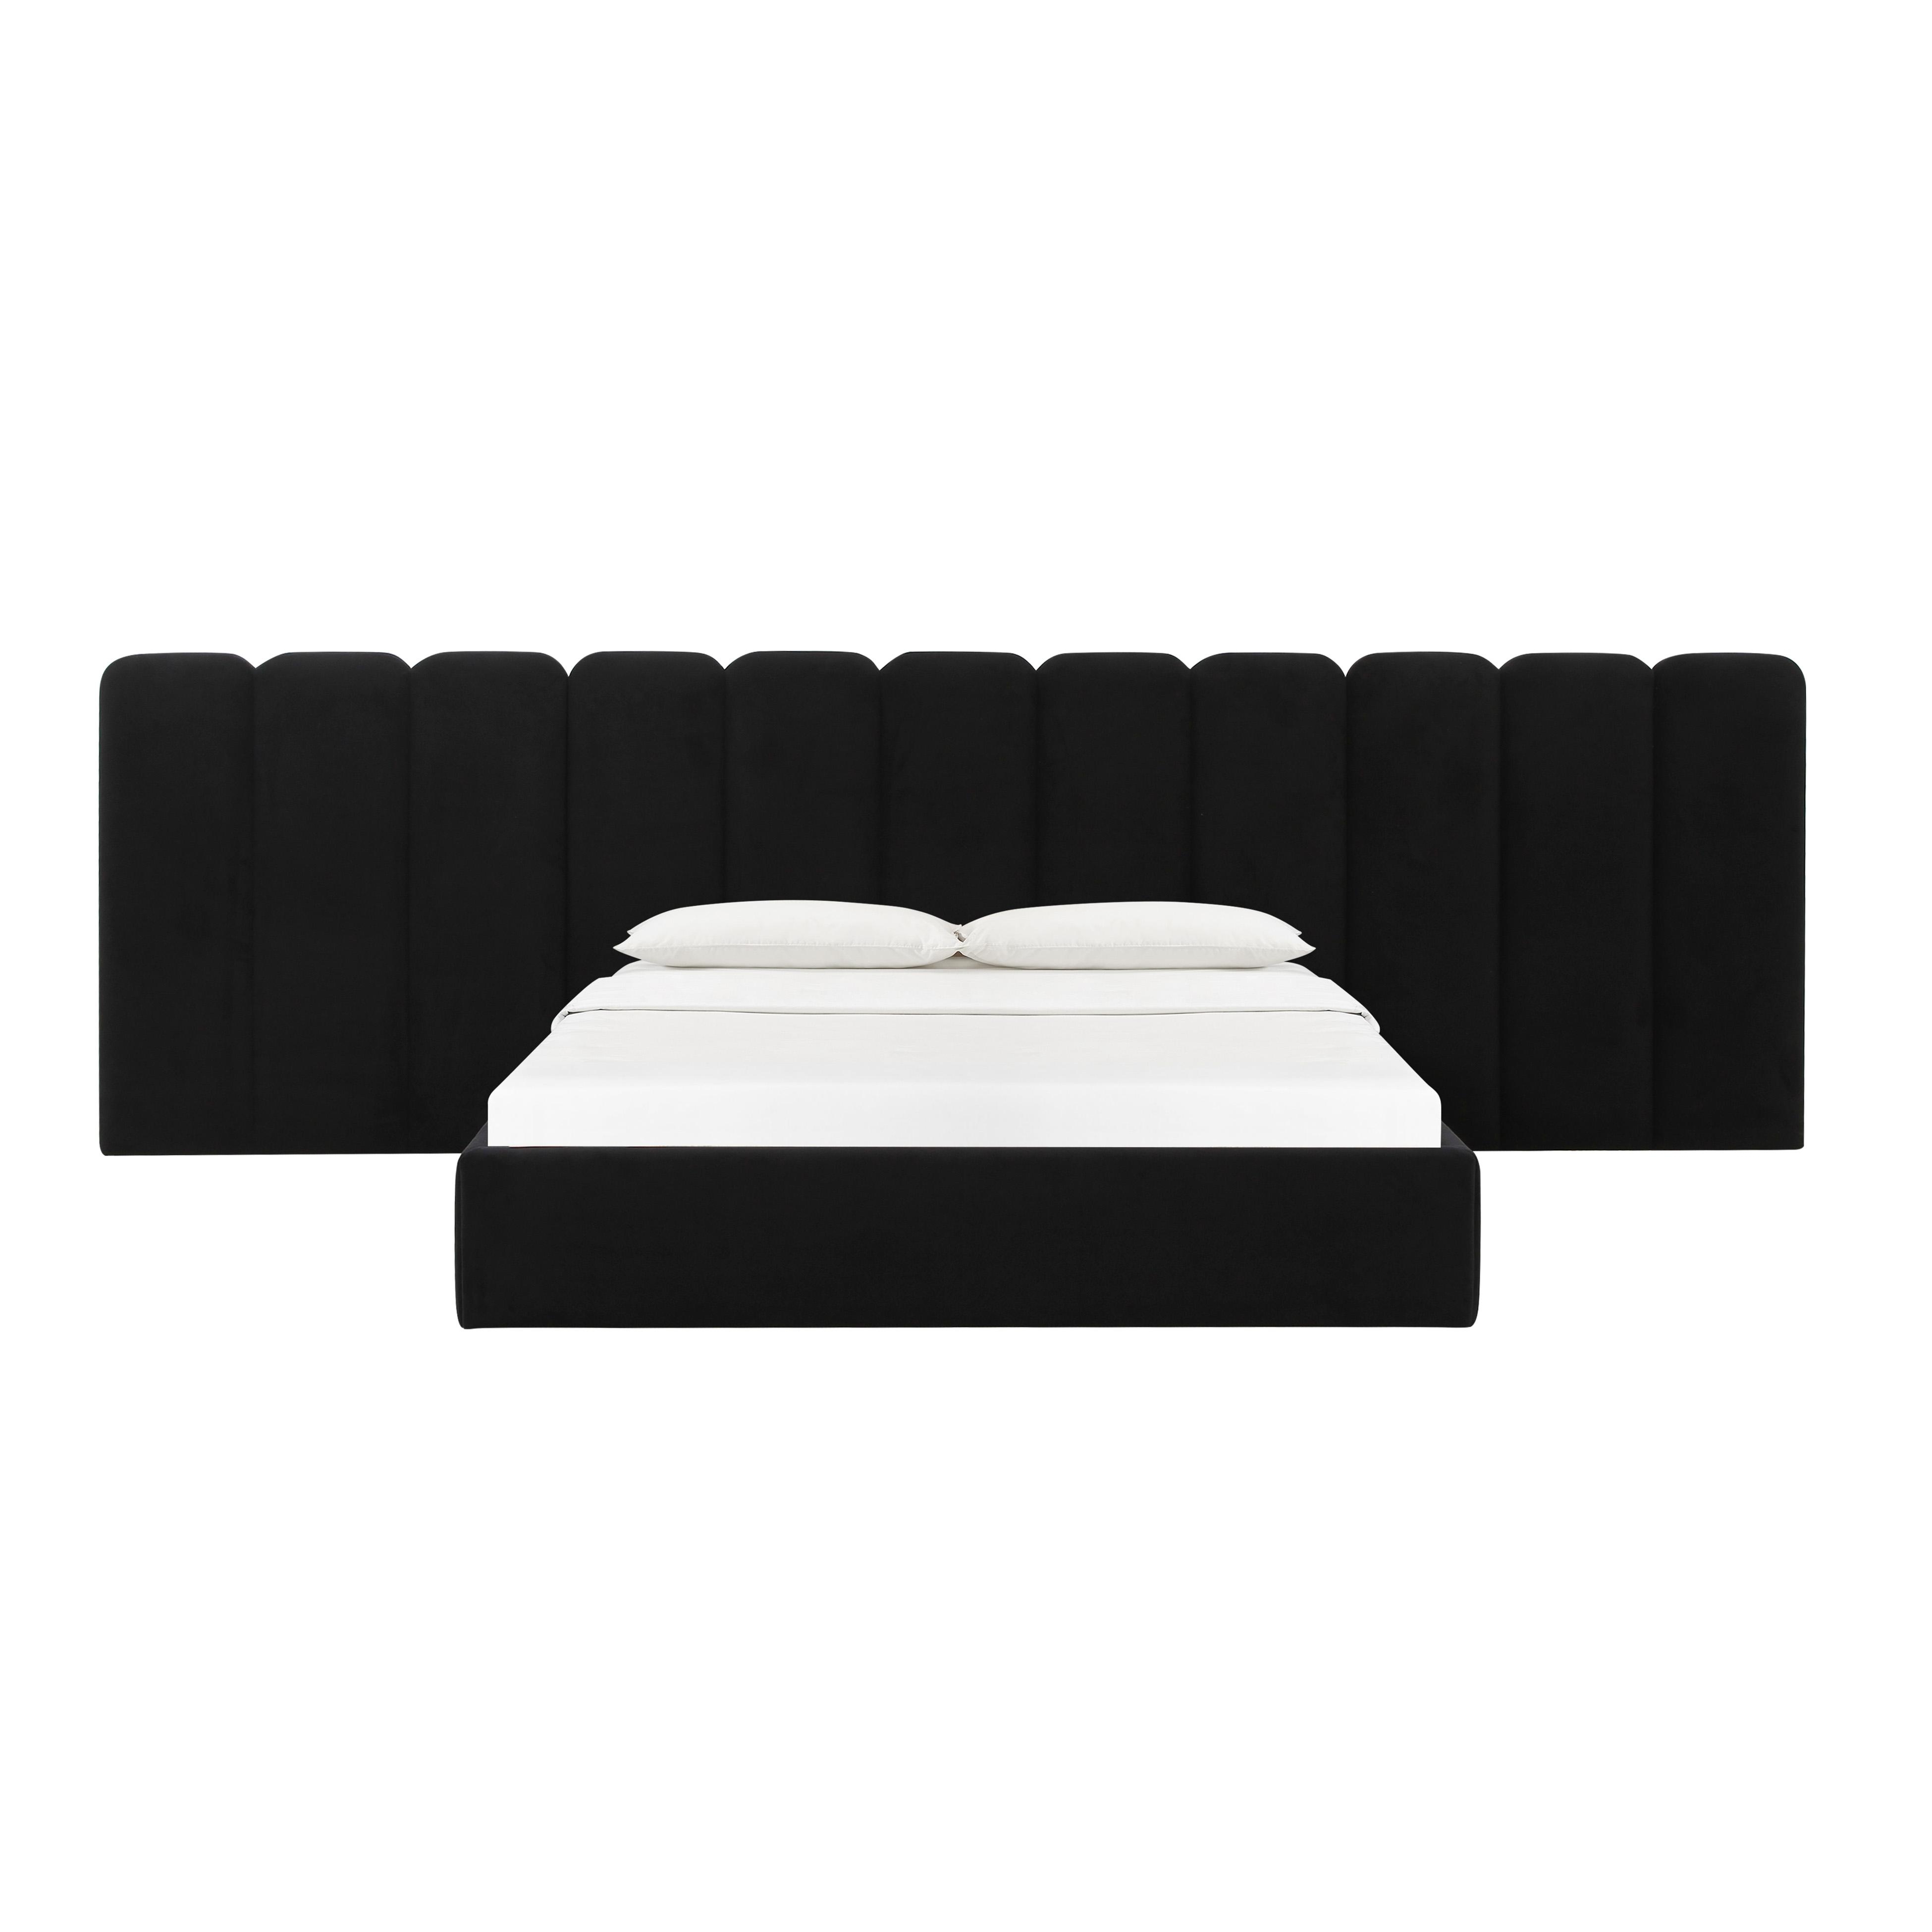 Palani Black Velvet Queen Bed with Wings - Image 1